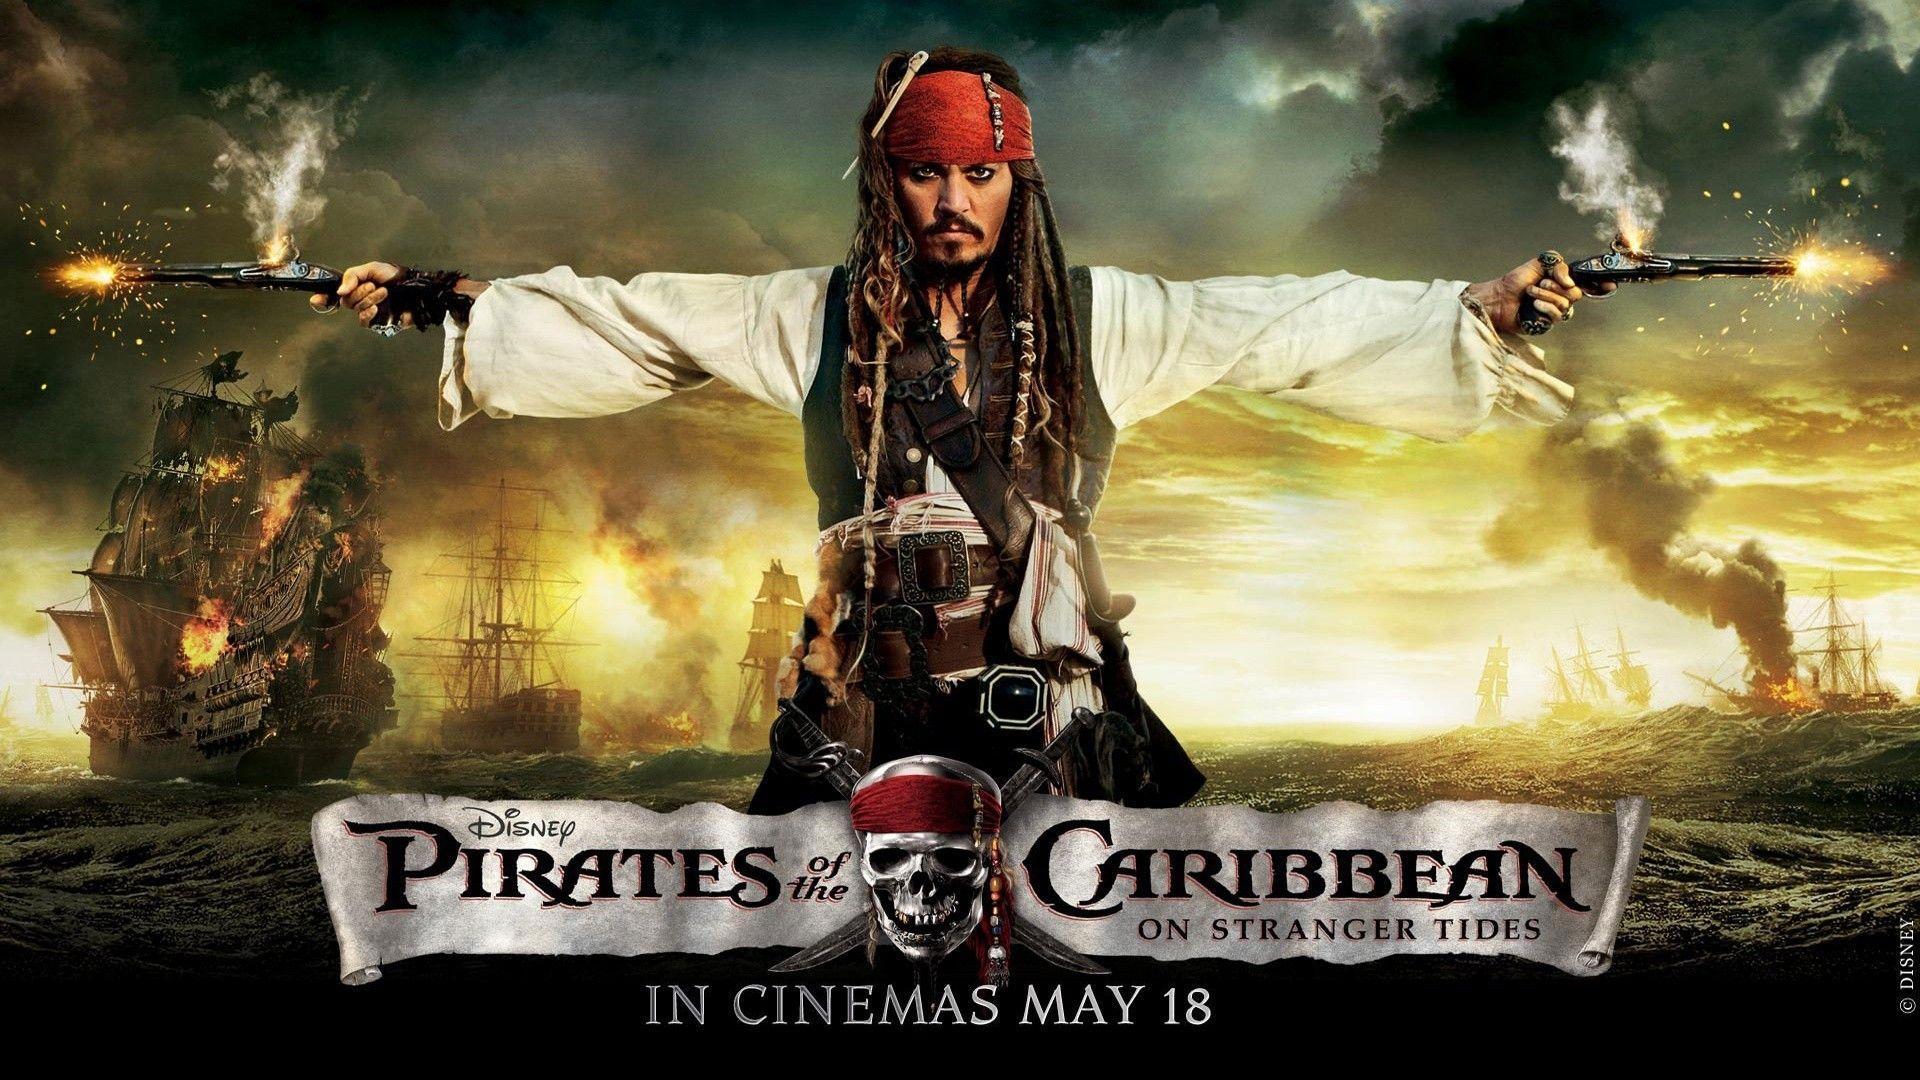 Pirates of the Caribbean, Johnny Depp, movie posters, Captain Jack